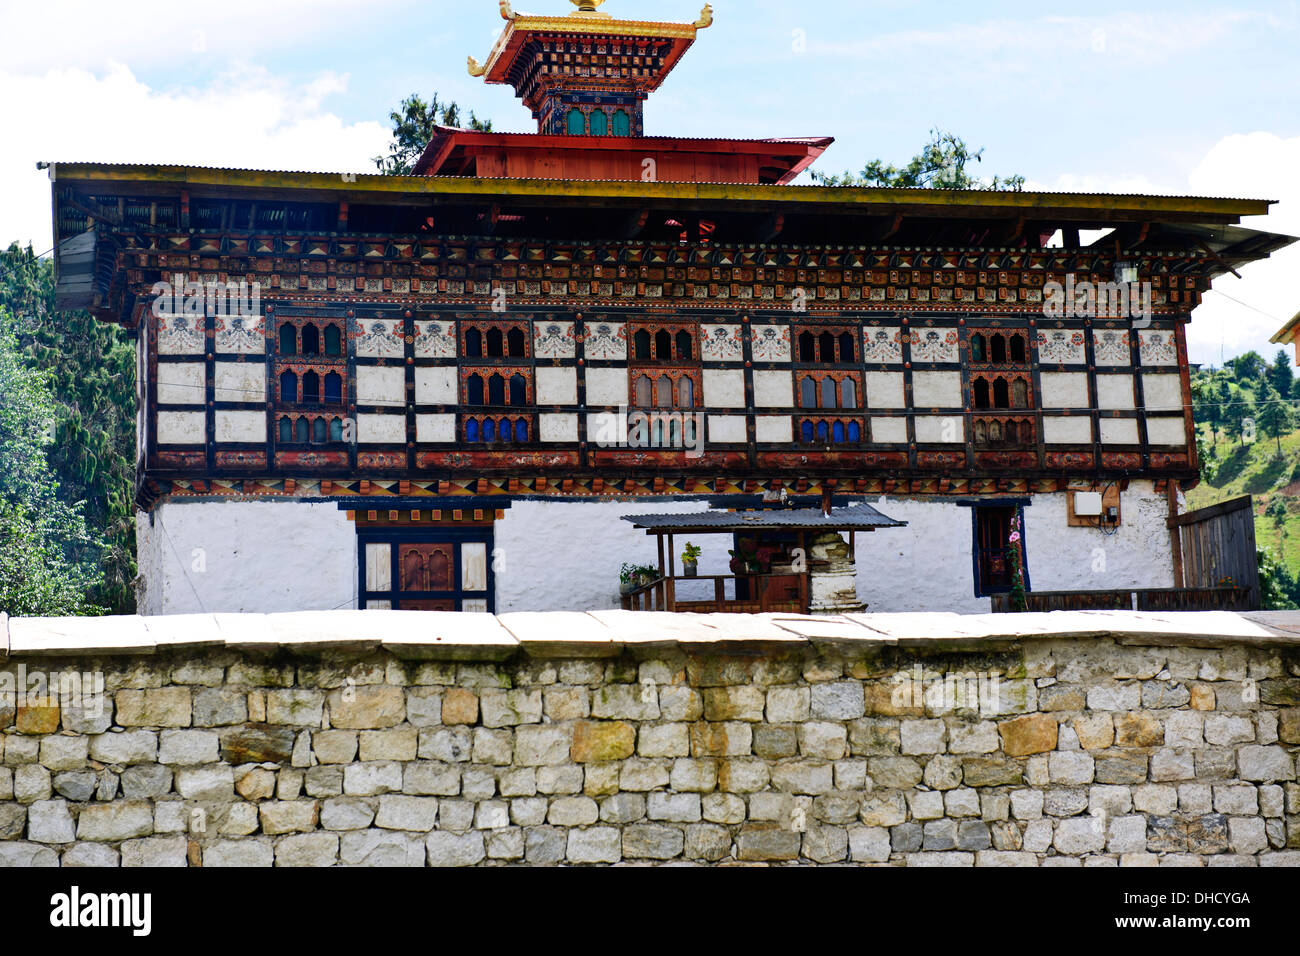 Traditional houses,wall paintings such as large red phallus symbols,animals by colorfully adorned wooden window frames,Bhutan Stock Photo